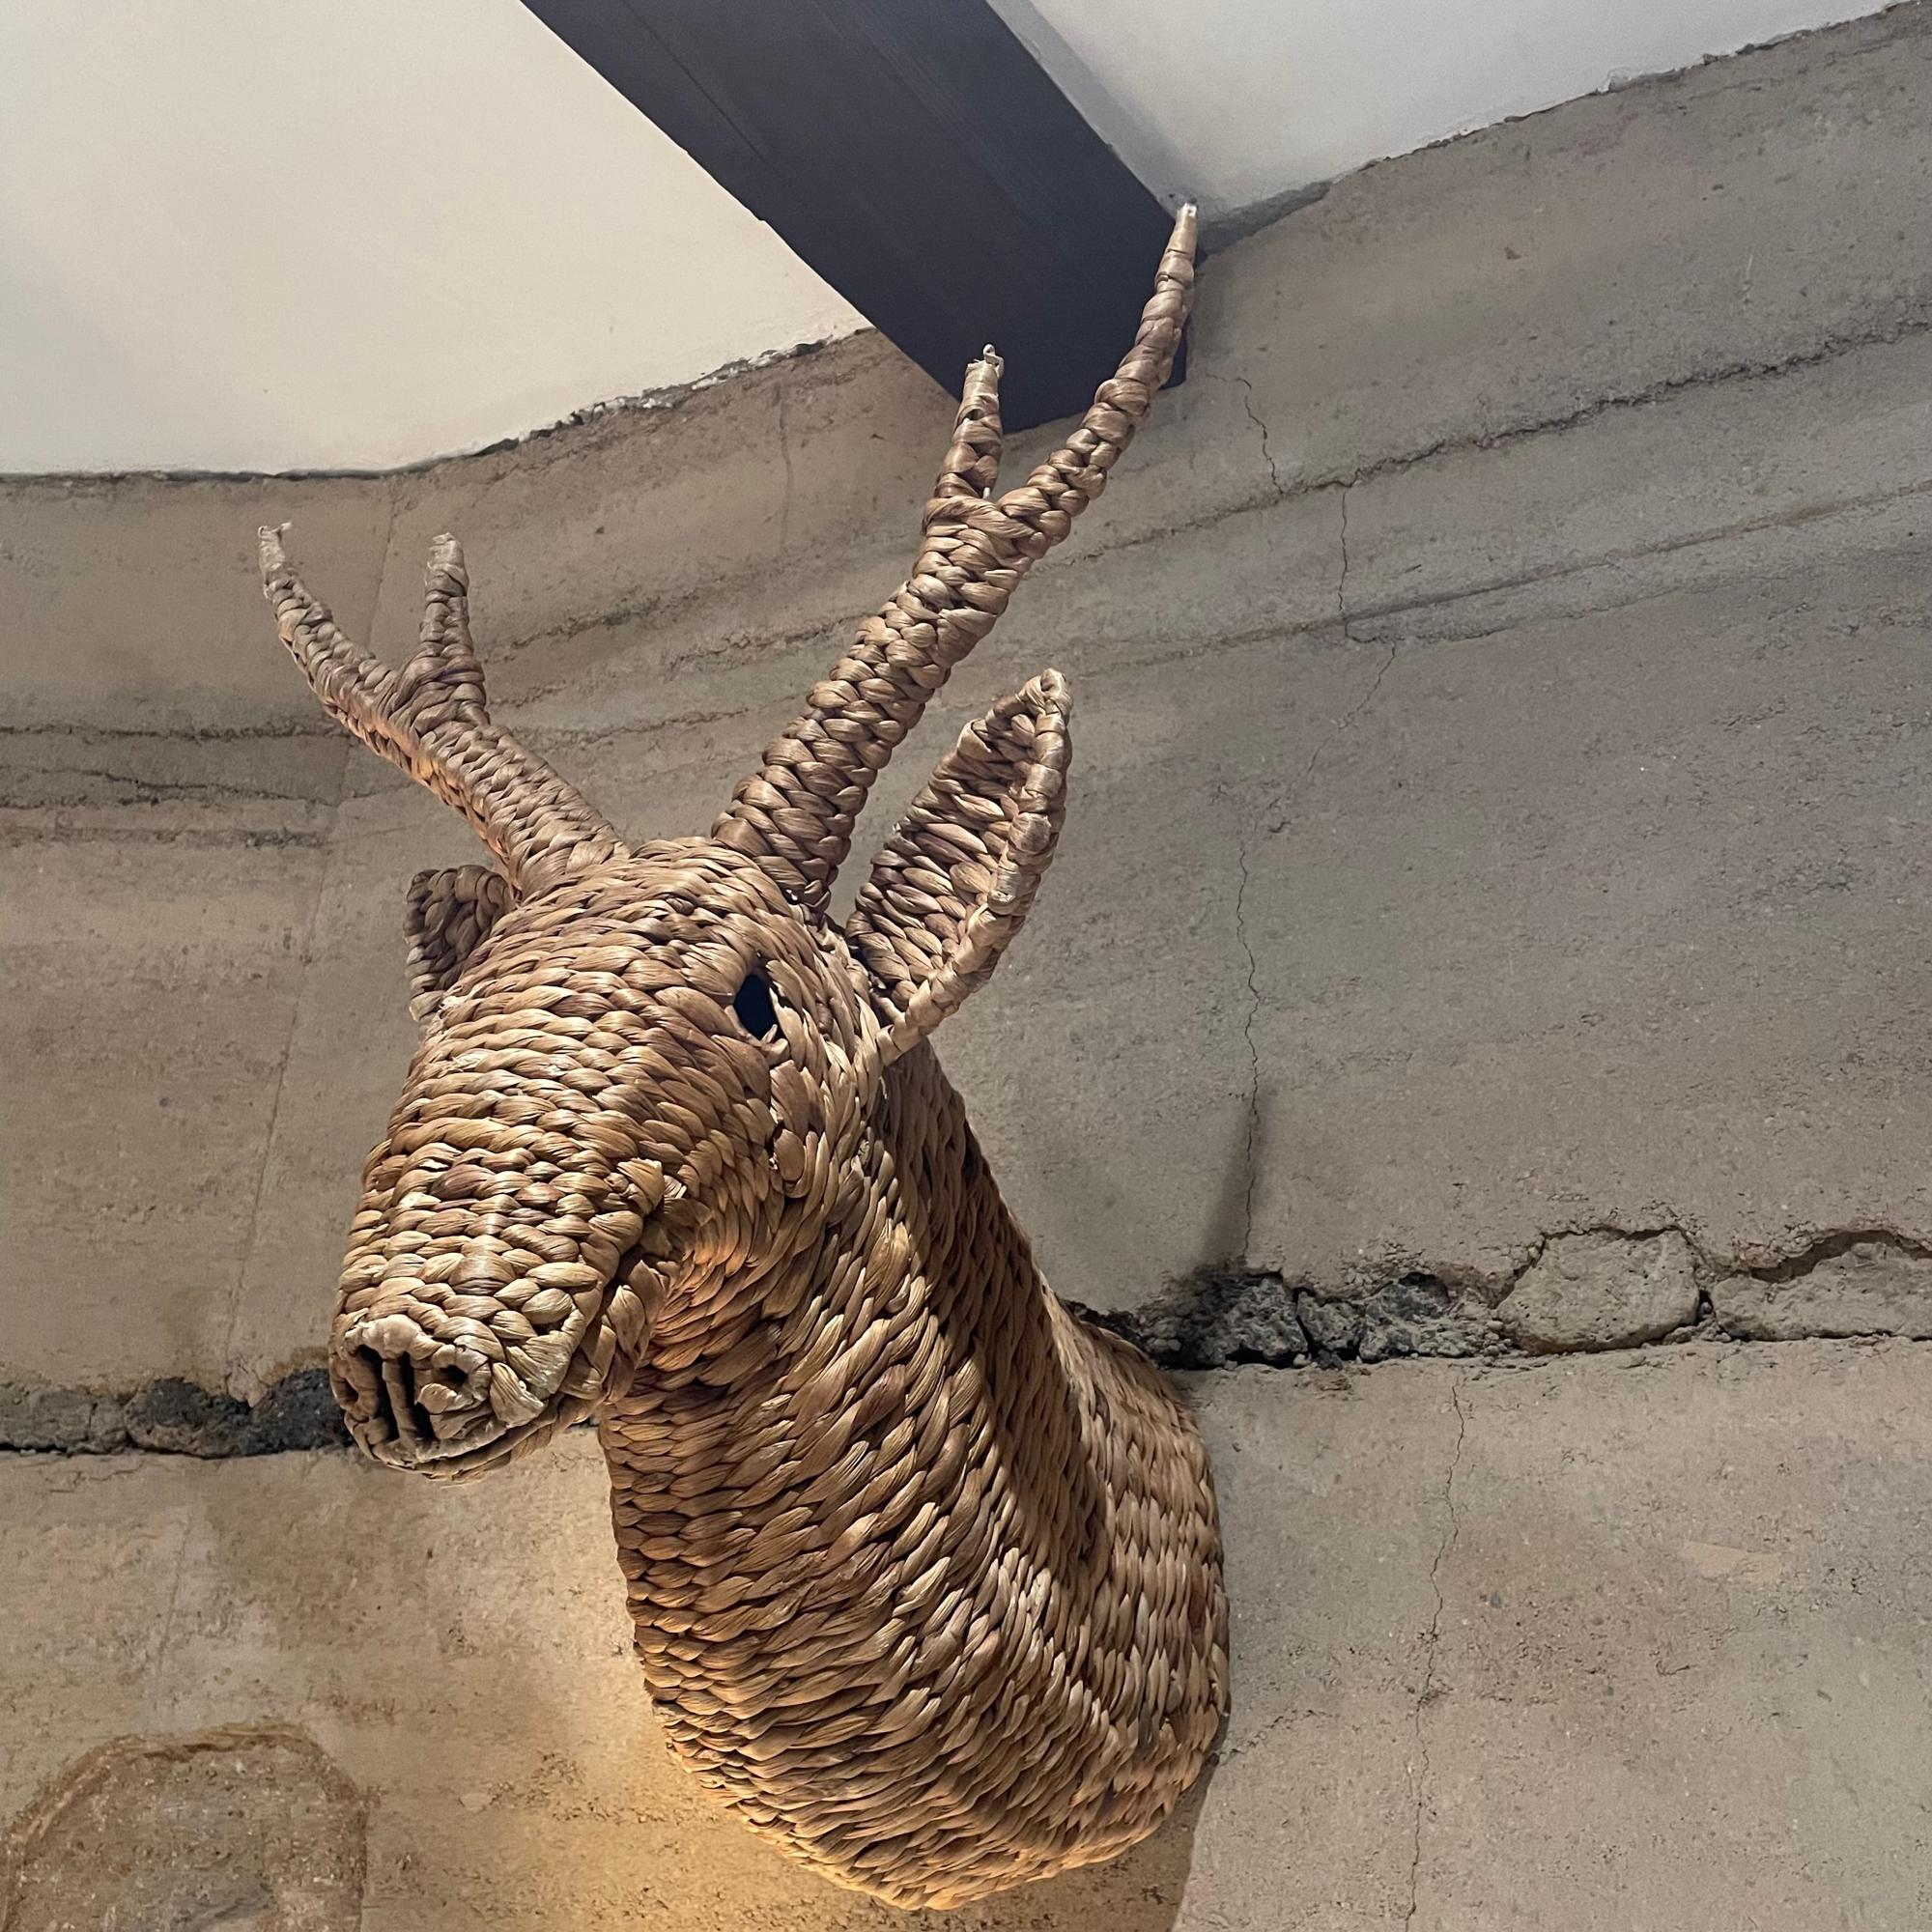 Deer Head
Style of Mario Lopez Torres handwoven reed handsome Stag Deer Head Mount Wall Art Sculpture
Measures: 20 D x 24 H x 19.25 W inches
Preowned original unrestored vintage condition. Review images provided.
Delivery to LA.